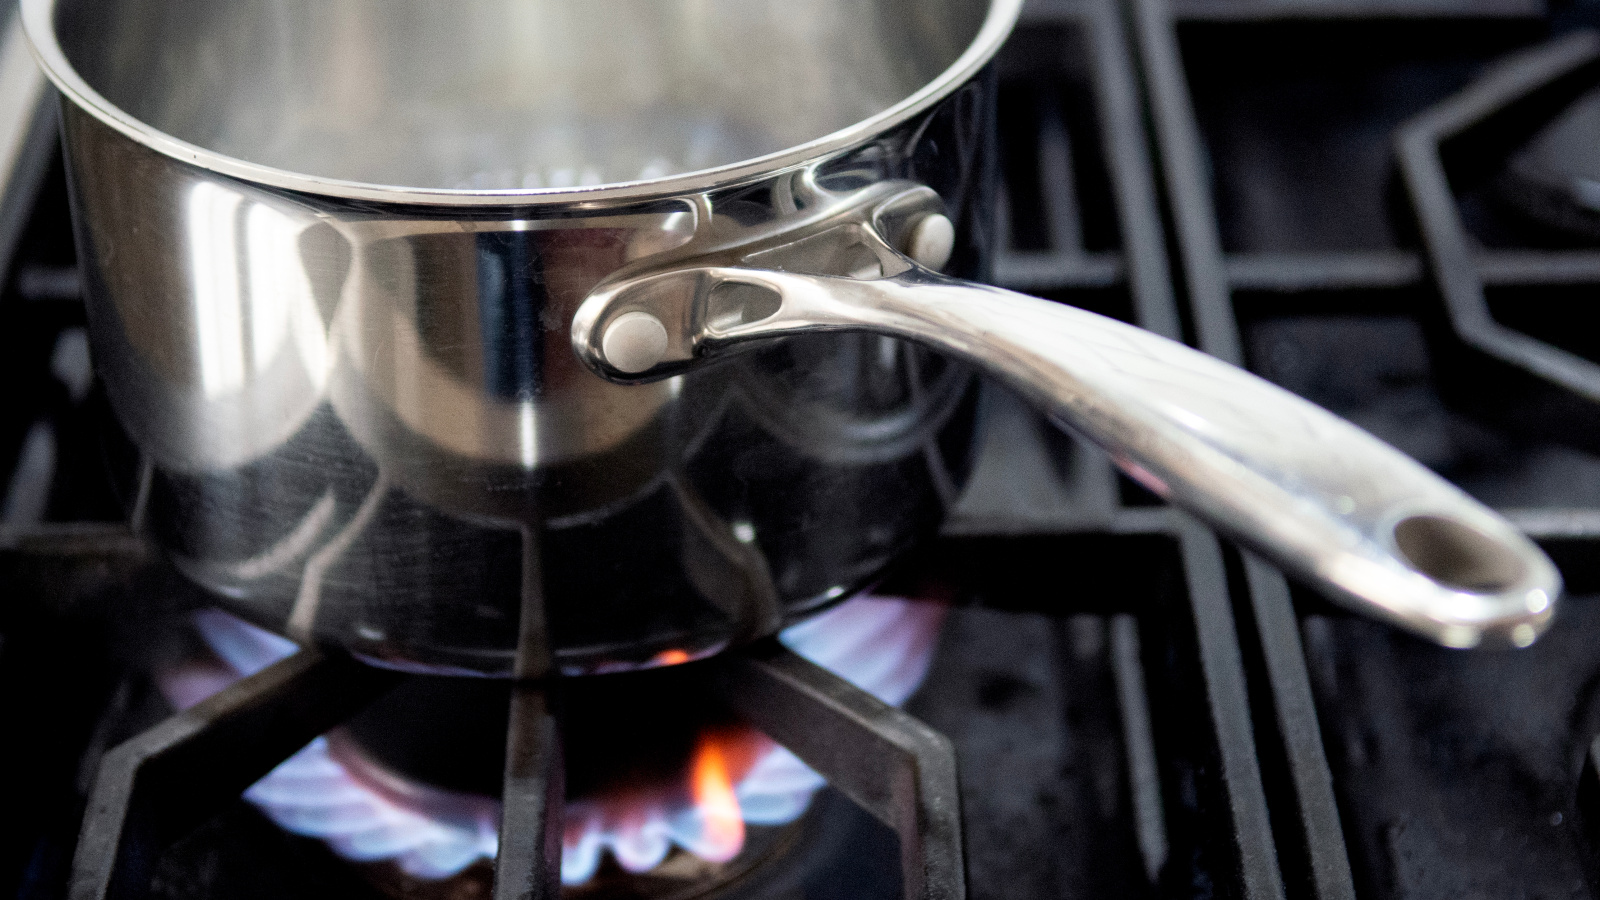 The hazards of gas stoves were flagged by the industry — and hidden — 50 years ago